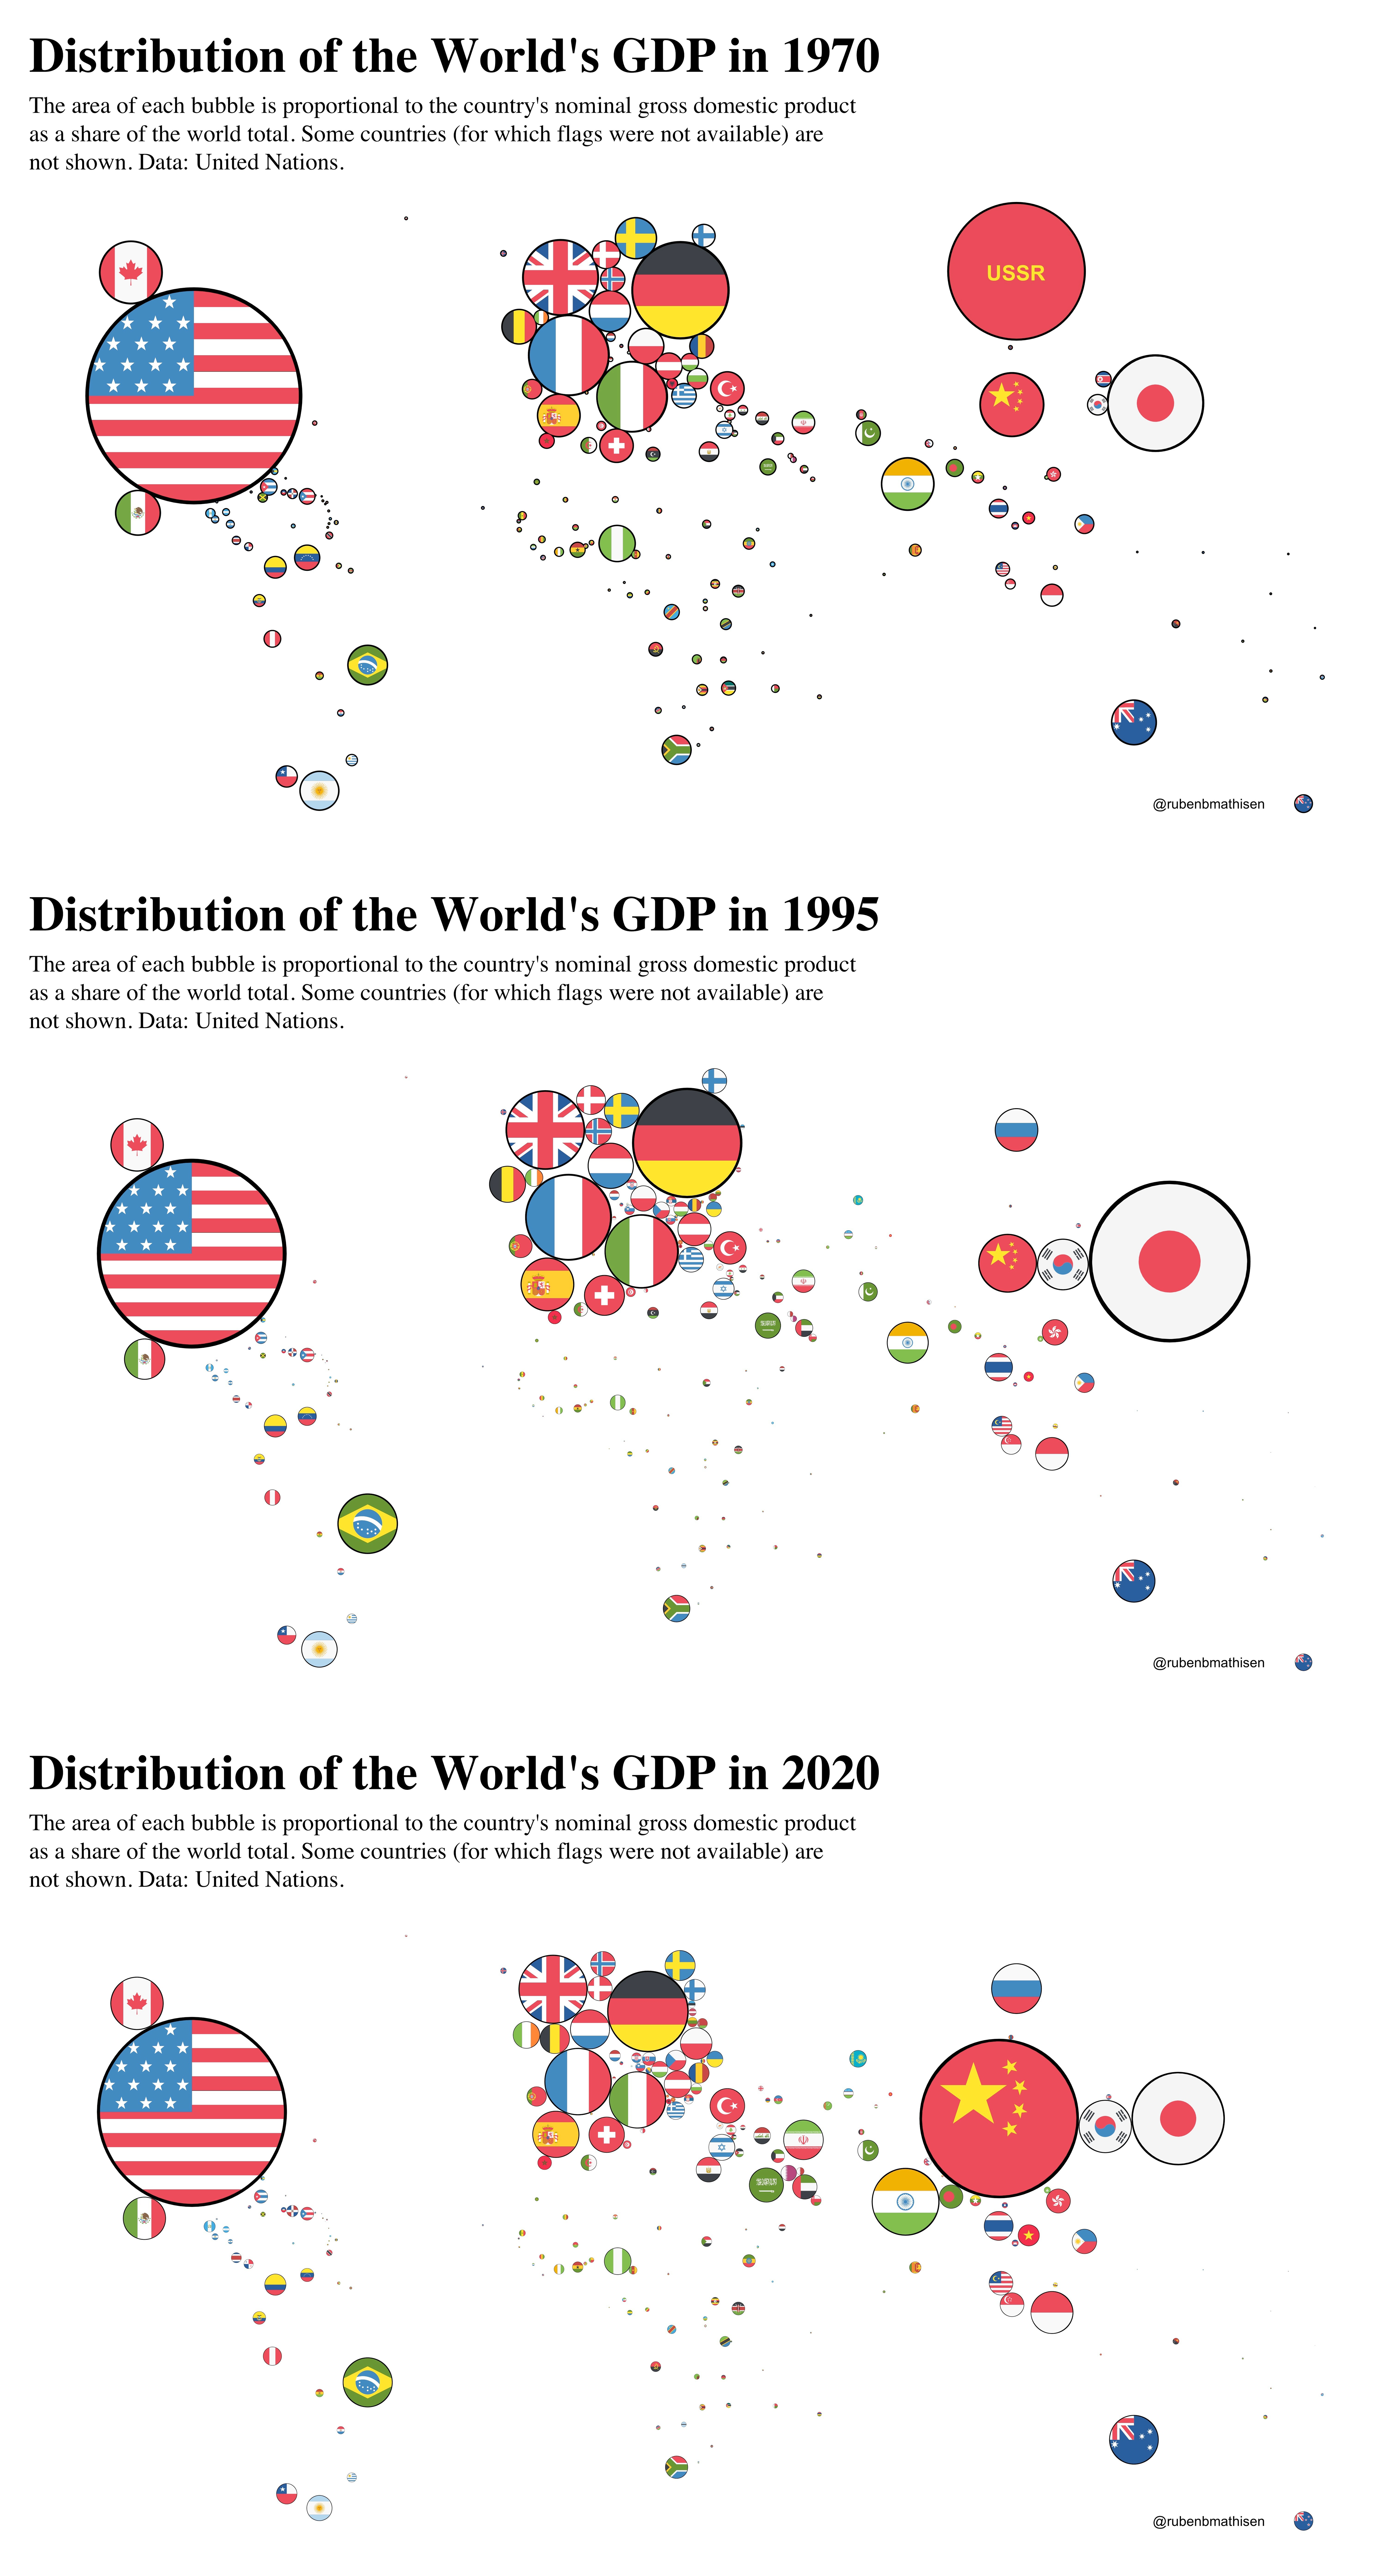 A series of 3 high-resolution graphics showing the world's largest economies in 1970, 1995, and 2020. Country bubbles are sized according to their share of global GDP at that time. Countries are placed roughly according to their latitude and longitude coordinates so that the graphics resemble a word map.